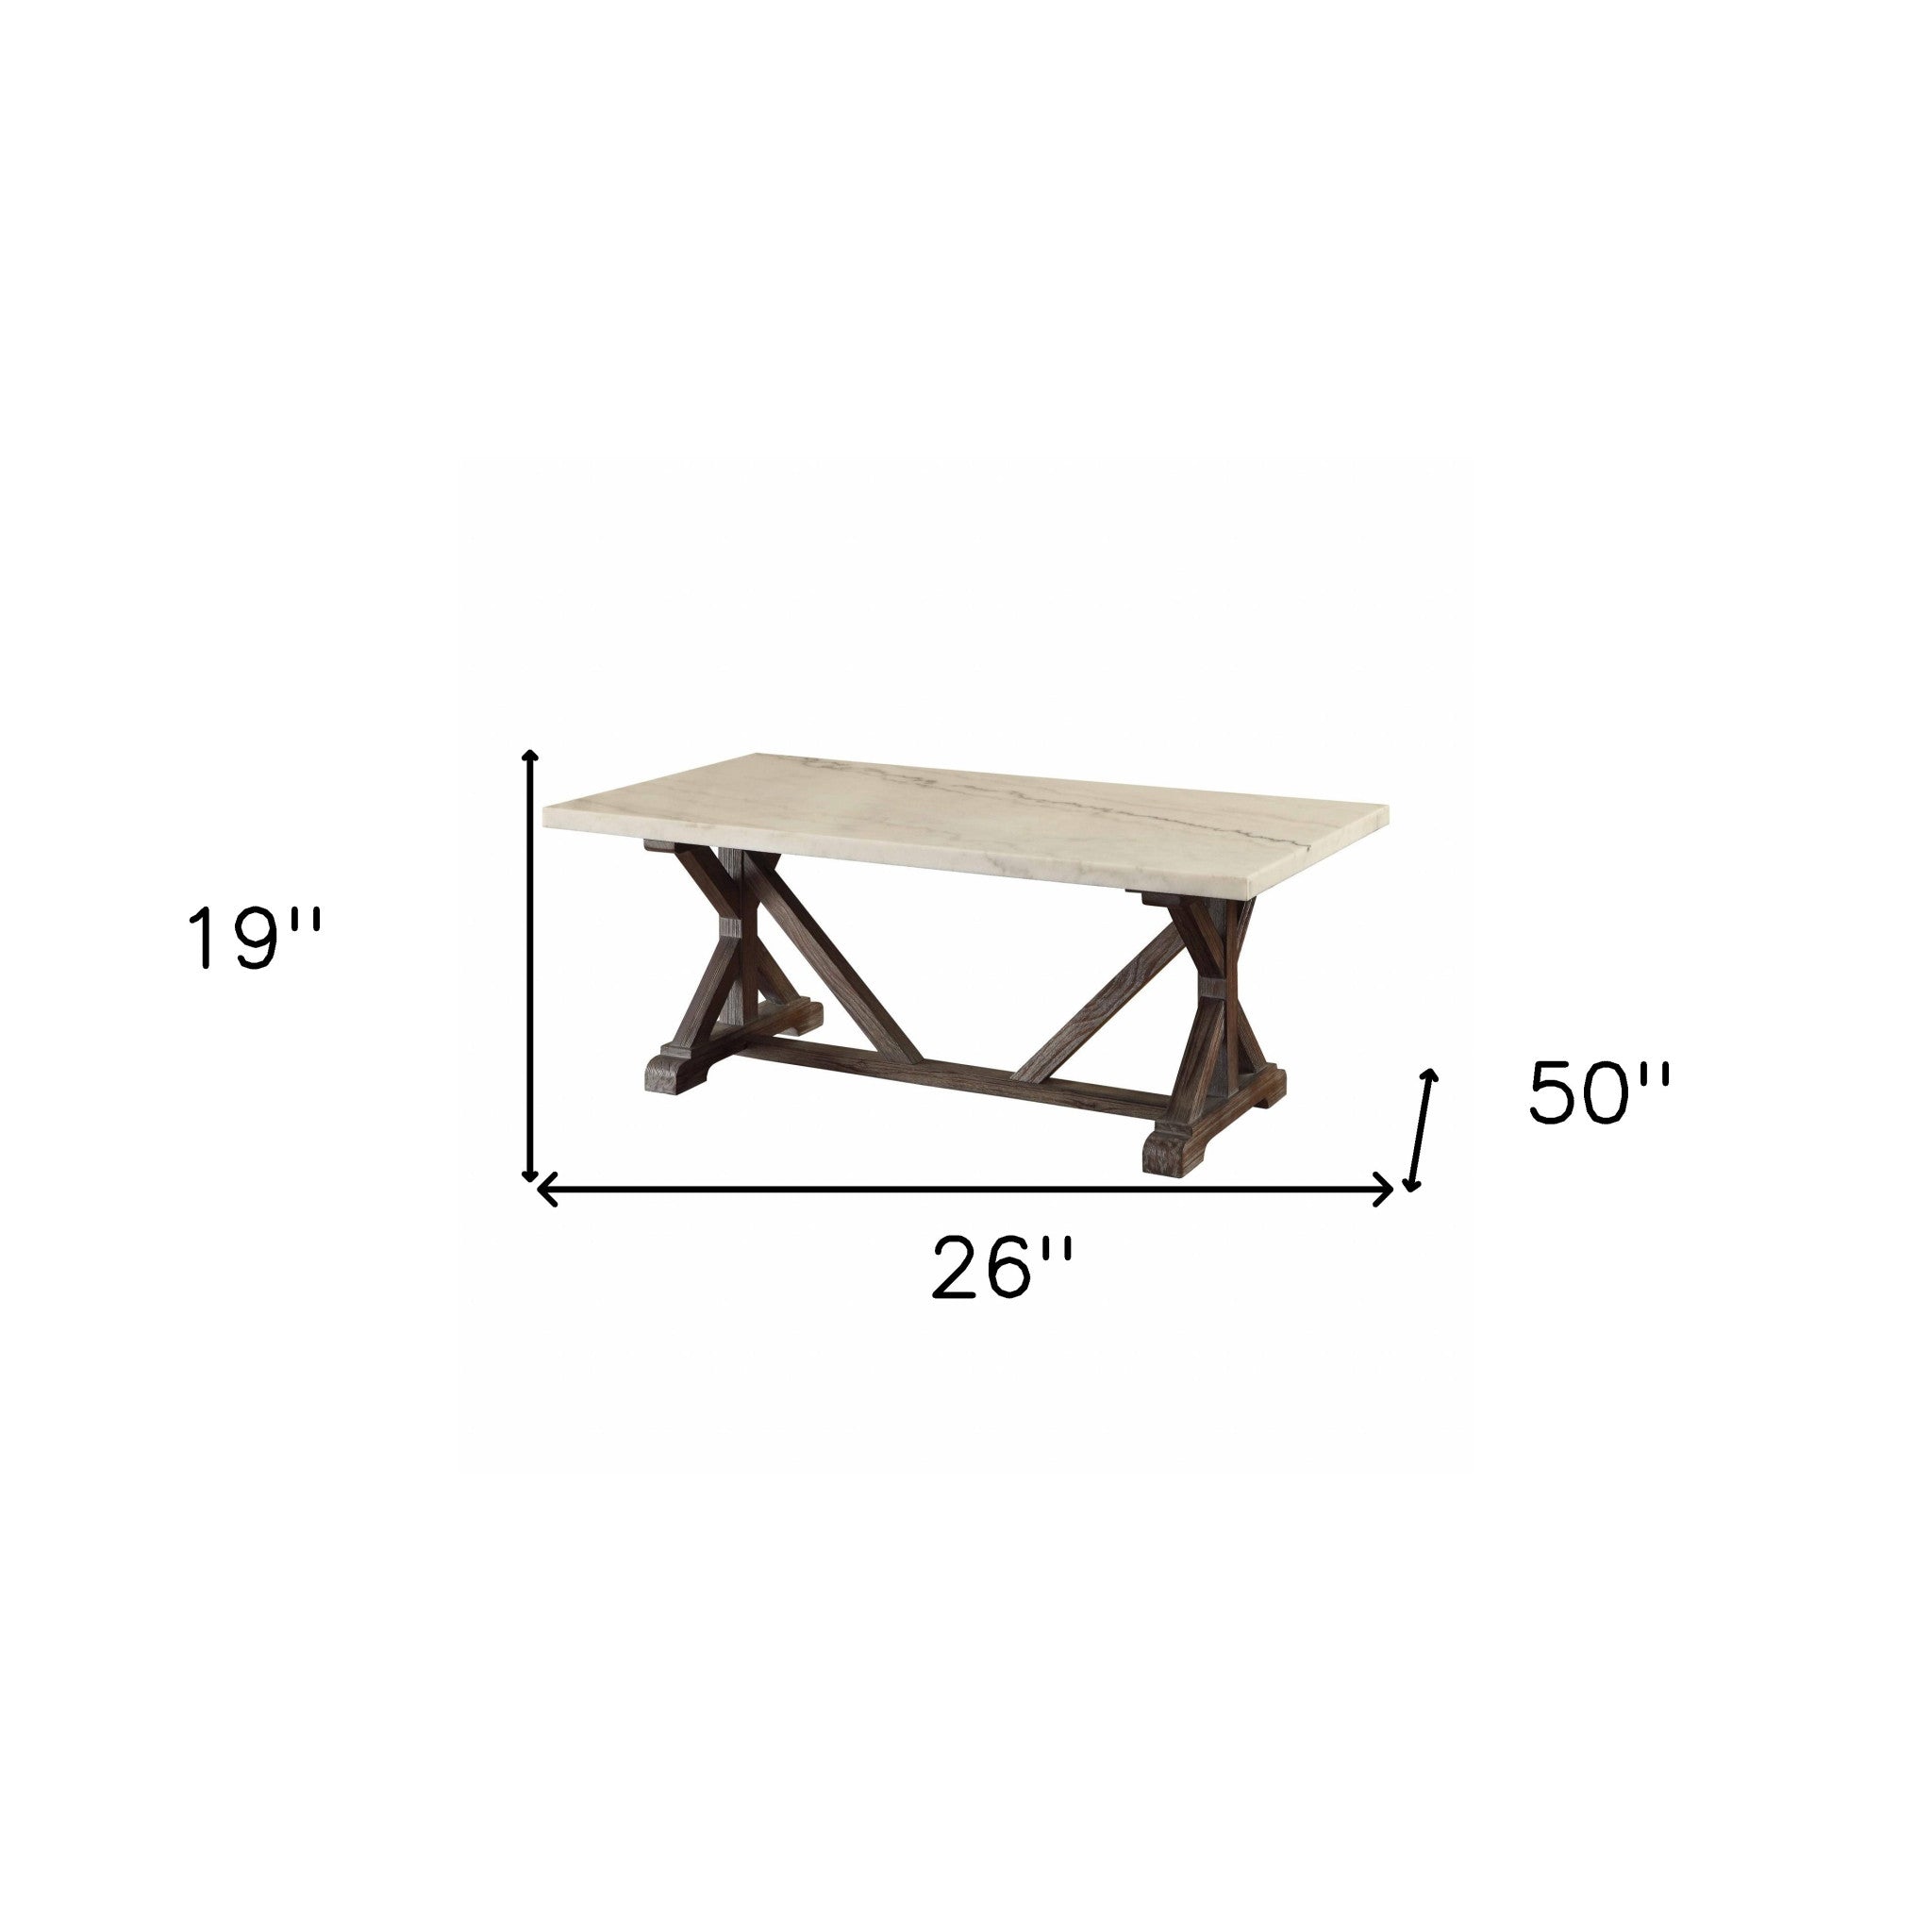 26" Brown And White Faux Marble And Solid Wood Rectangular Coffee Table